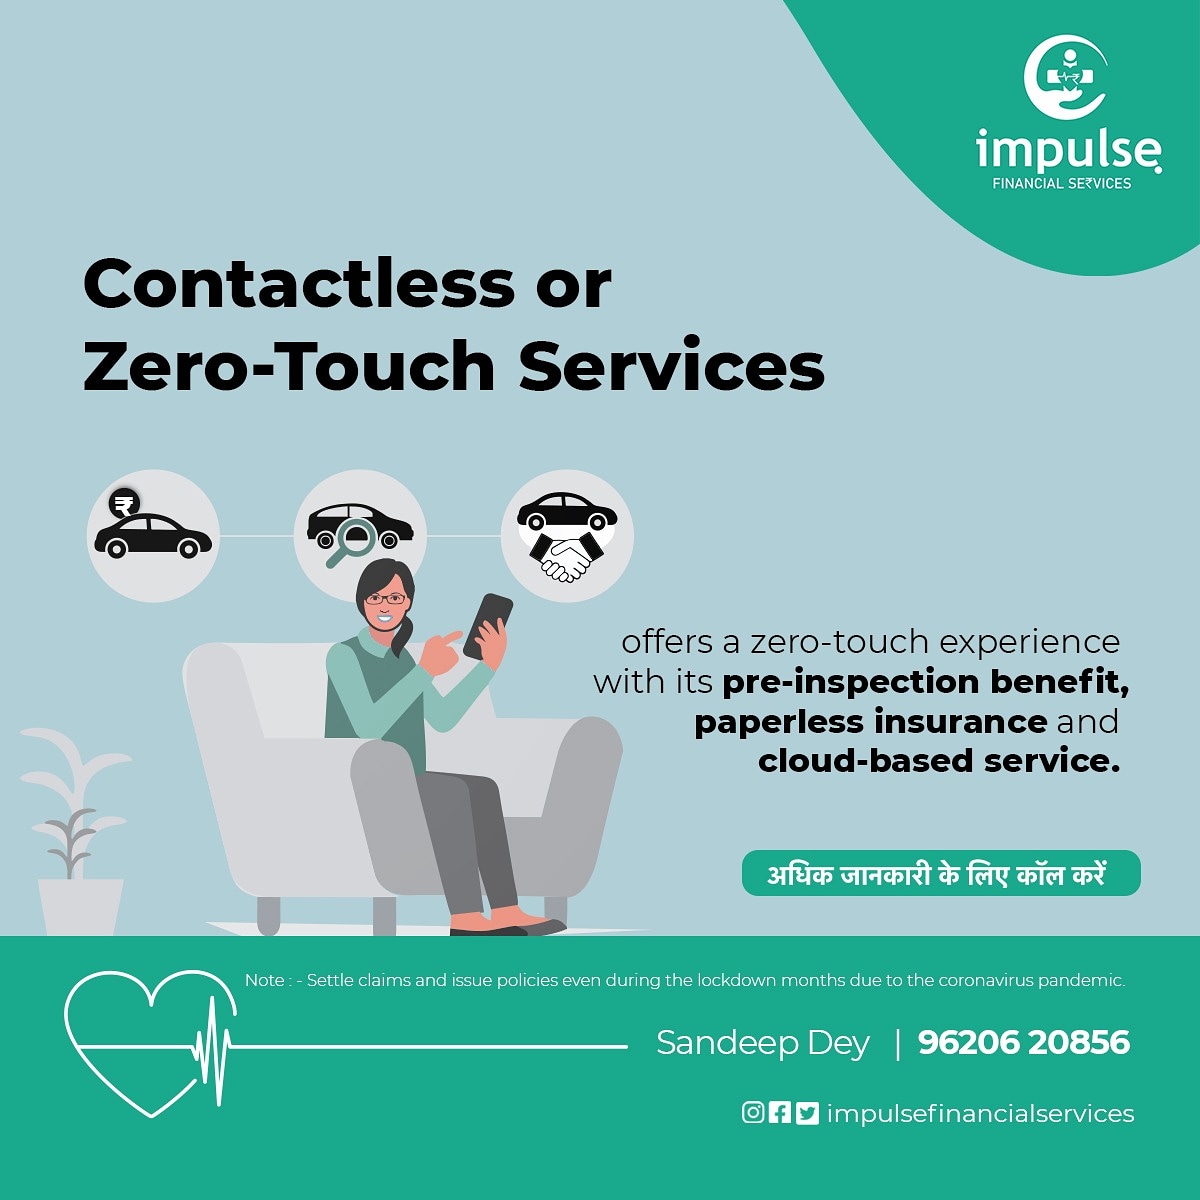 Contactless or Zero-Touch Services
•
offers a zero-touch experience with its pre-inspection benefit, paperless insurance and cloud-based service.
•
अधिक जानकारी के लिए कॉल करें
Sandeep Dey | 96206 20856
•
•
#ImpluseFinancialServices 
#Contactlessservices 
#Zerotouchservices